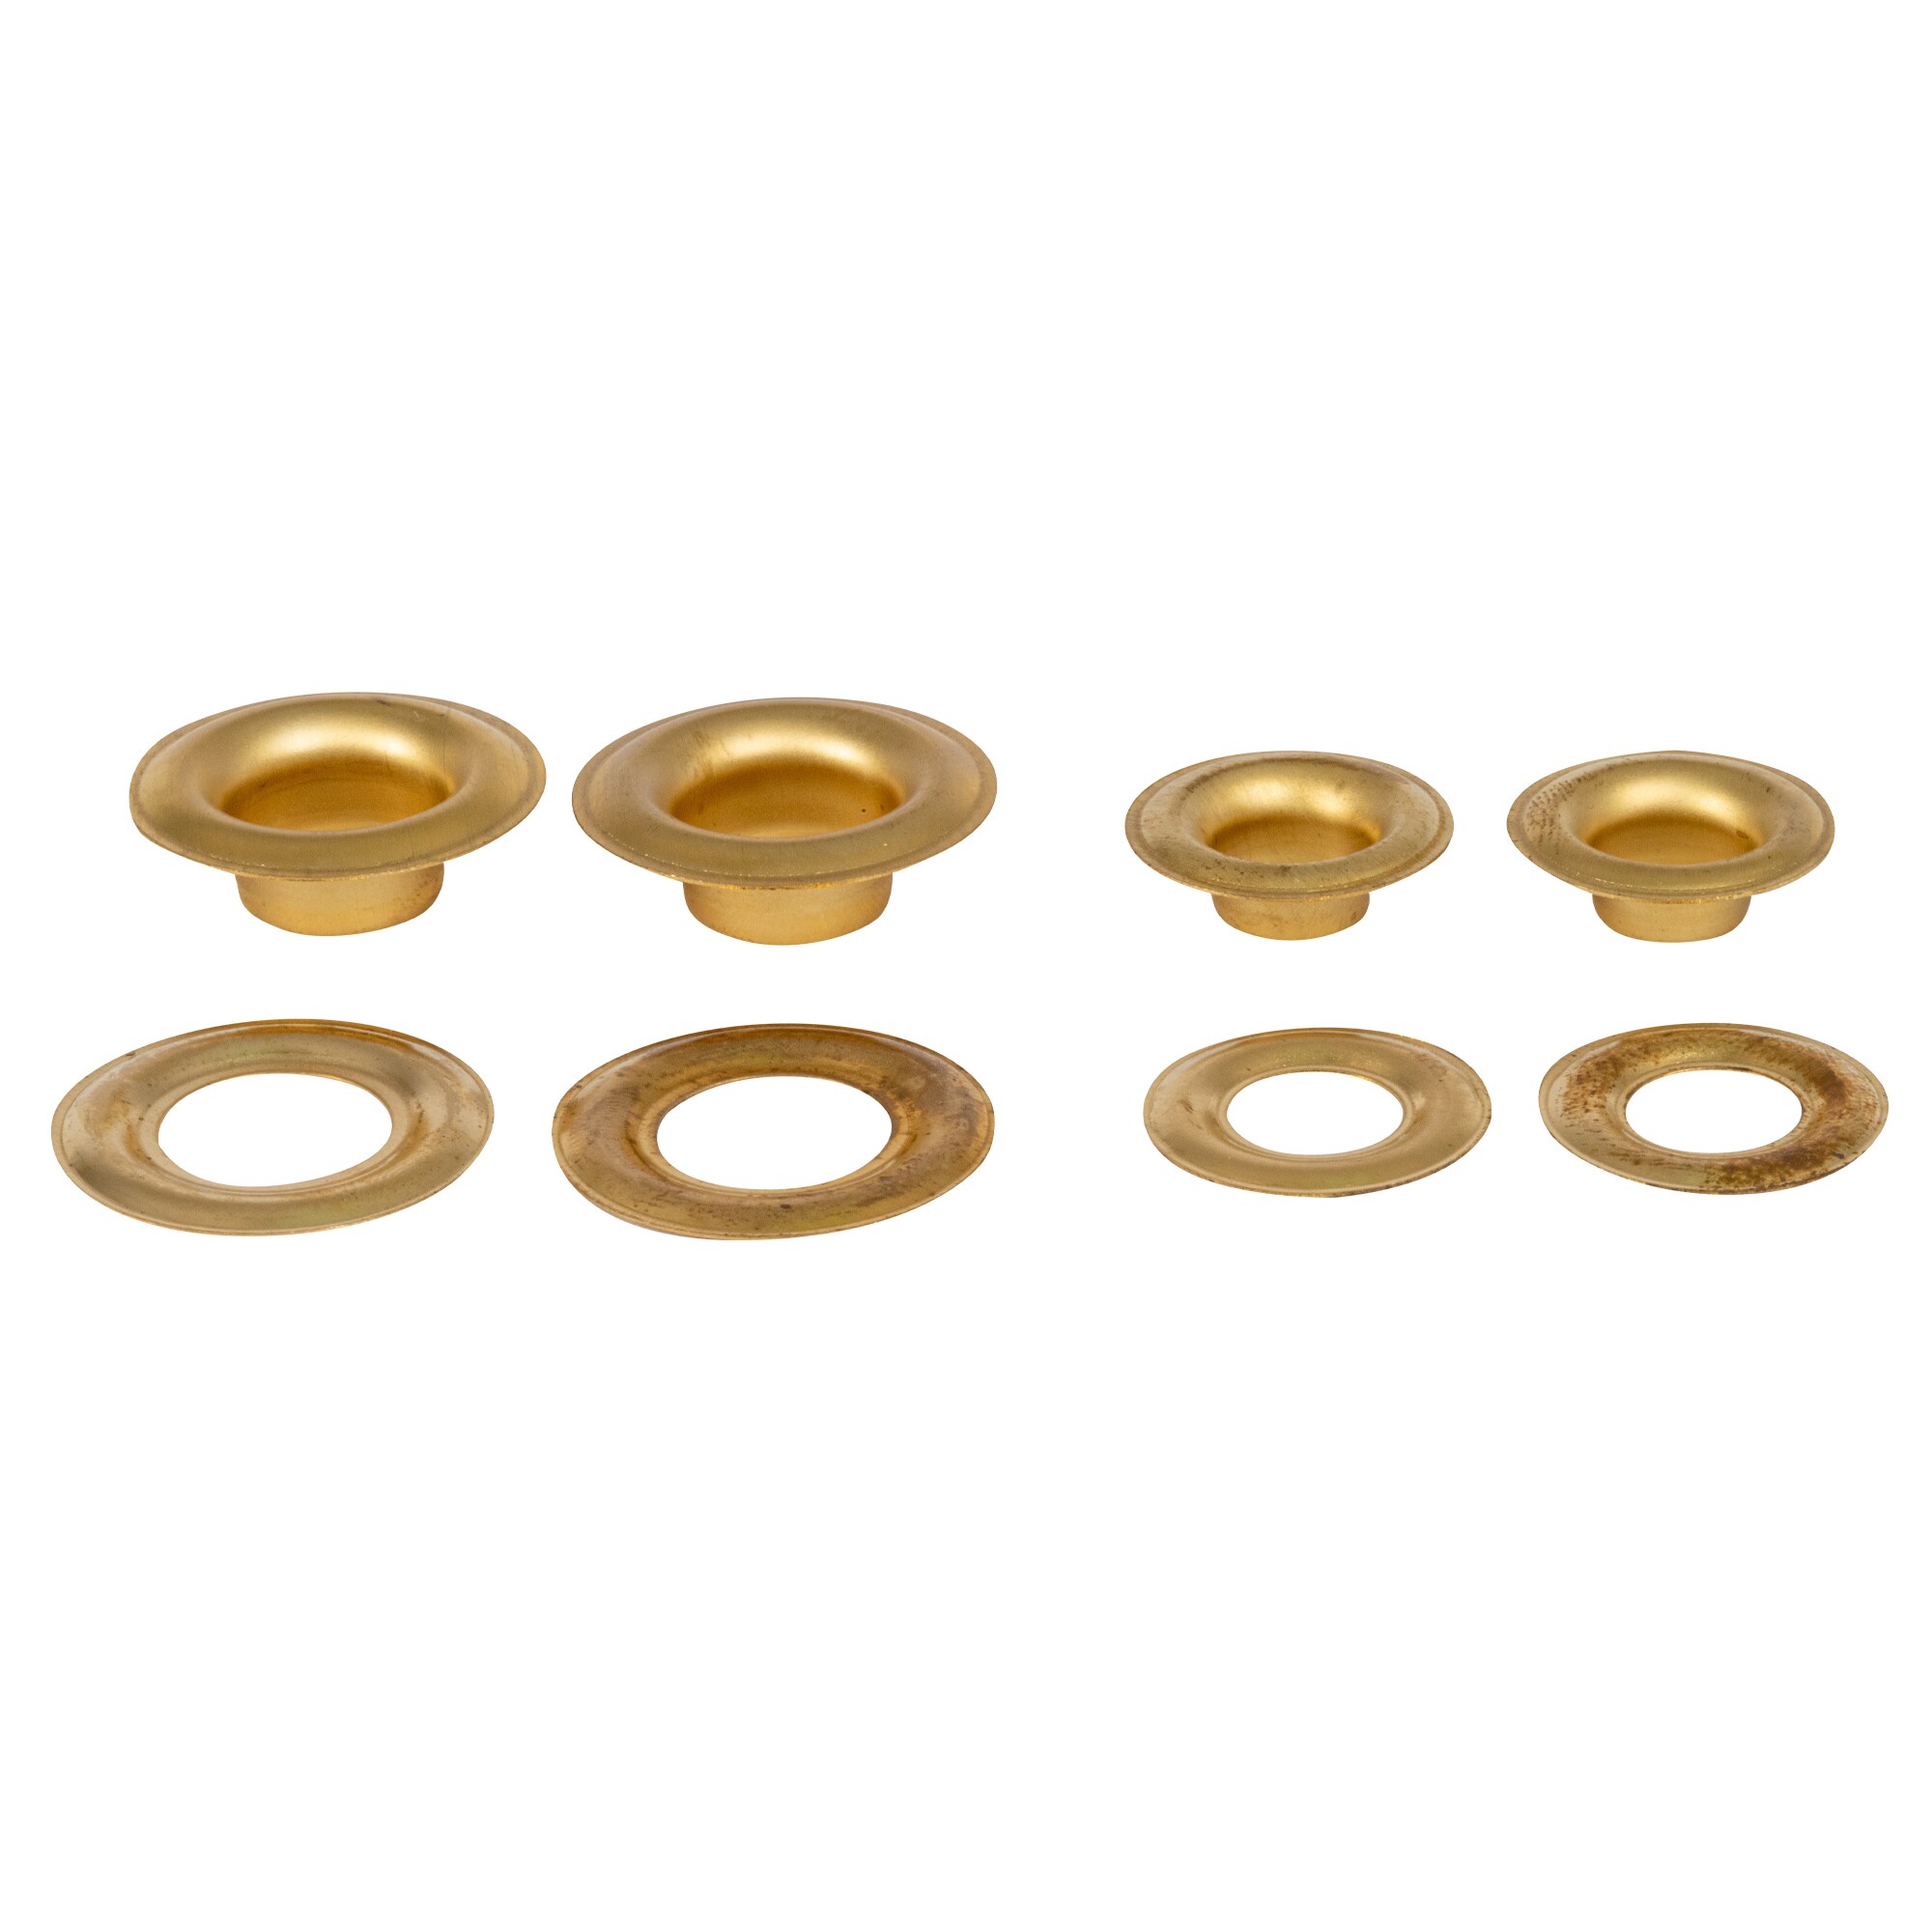 General Tools 71262 3/8 Inch Grommet Kit 24 Pack: Grommets And